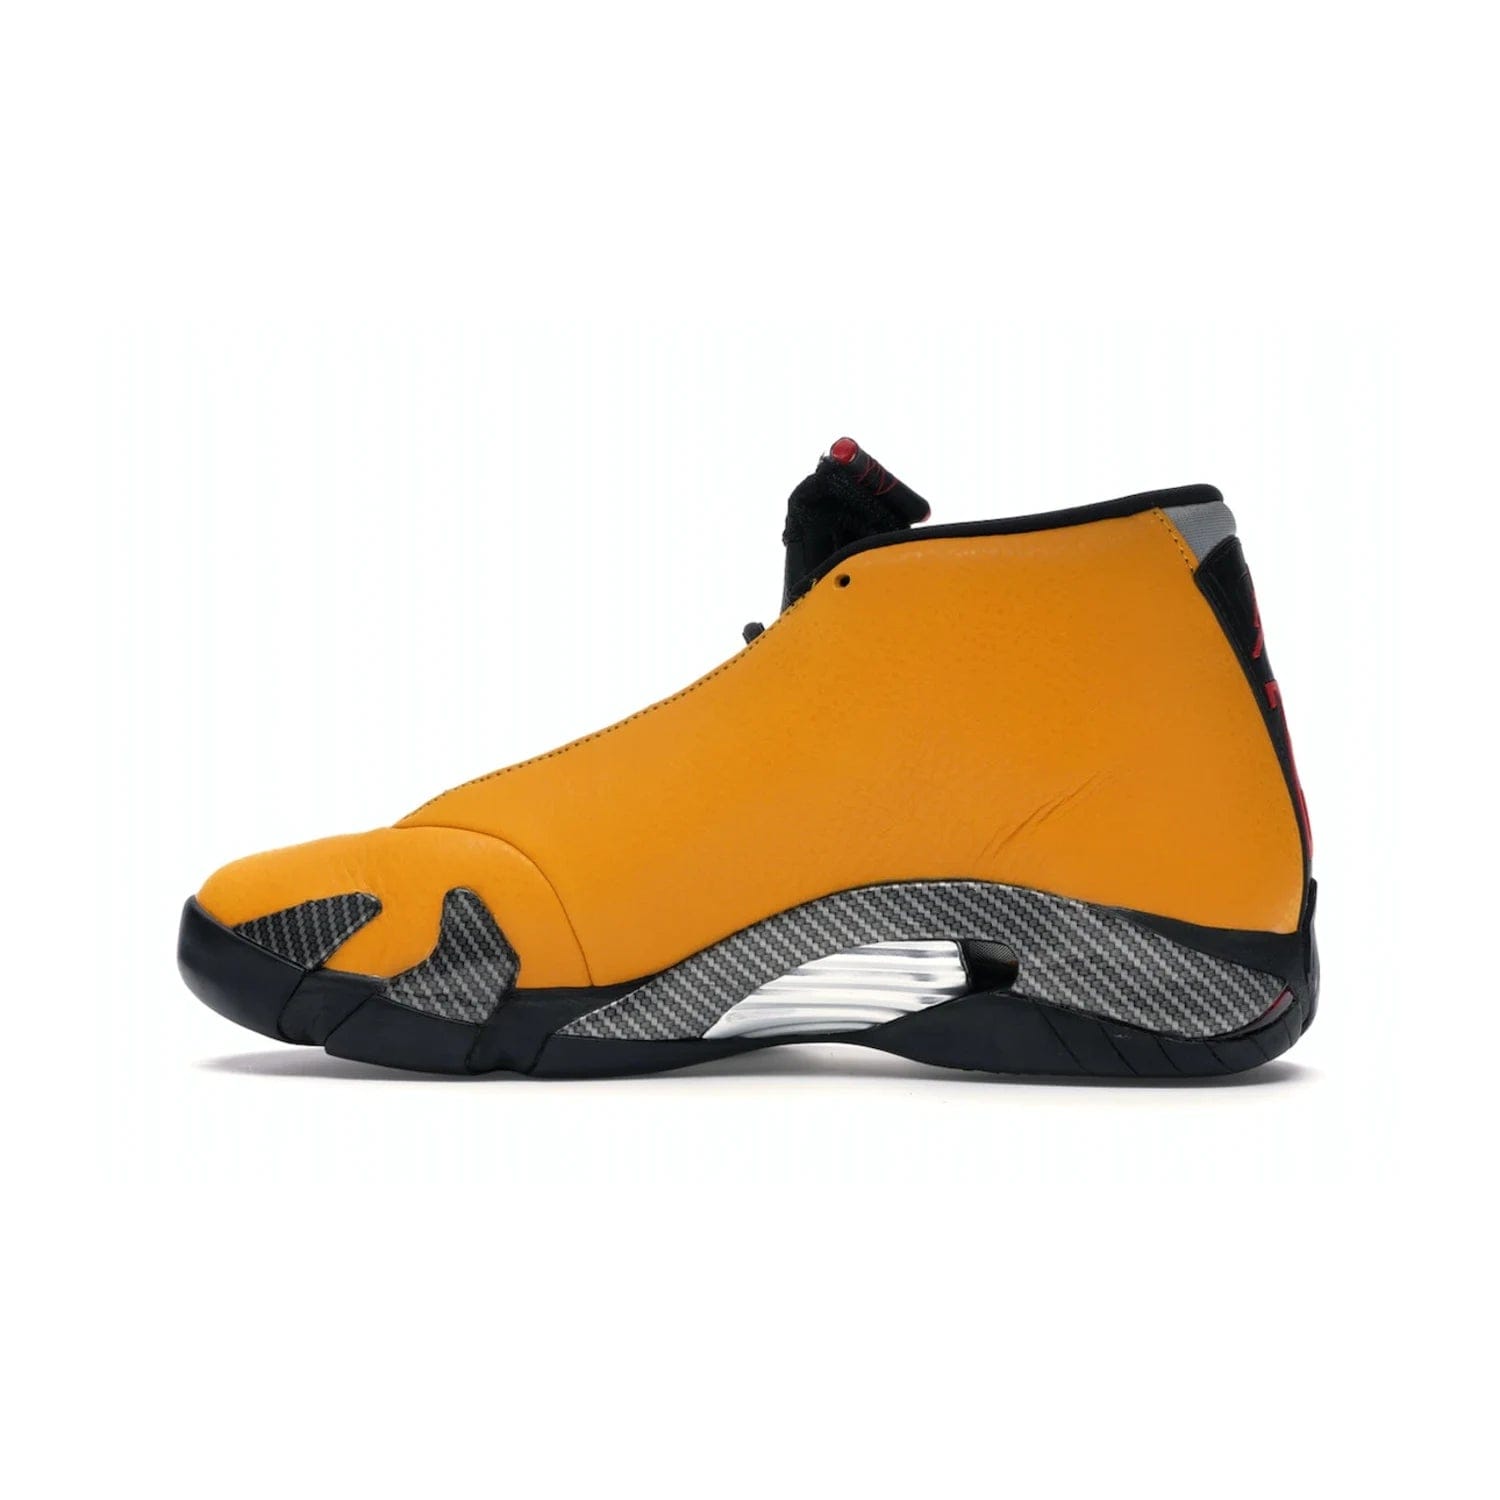 Jordan 14 Retro University Gold - Image 20 - Only at www.BallersClubKickz.com - Air Jordan 14 Retro University Gold: High-quality leather sneaker with Jumpman, tongue & heel logos. Zoom Air units & herringbone traction for superior comfort. University Gold outsole for stylish streetwear.